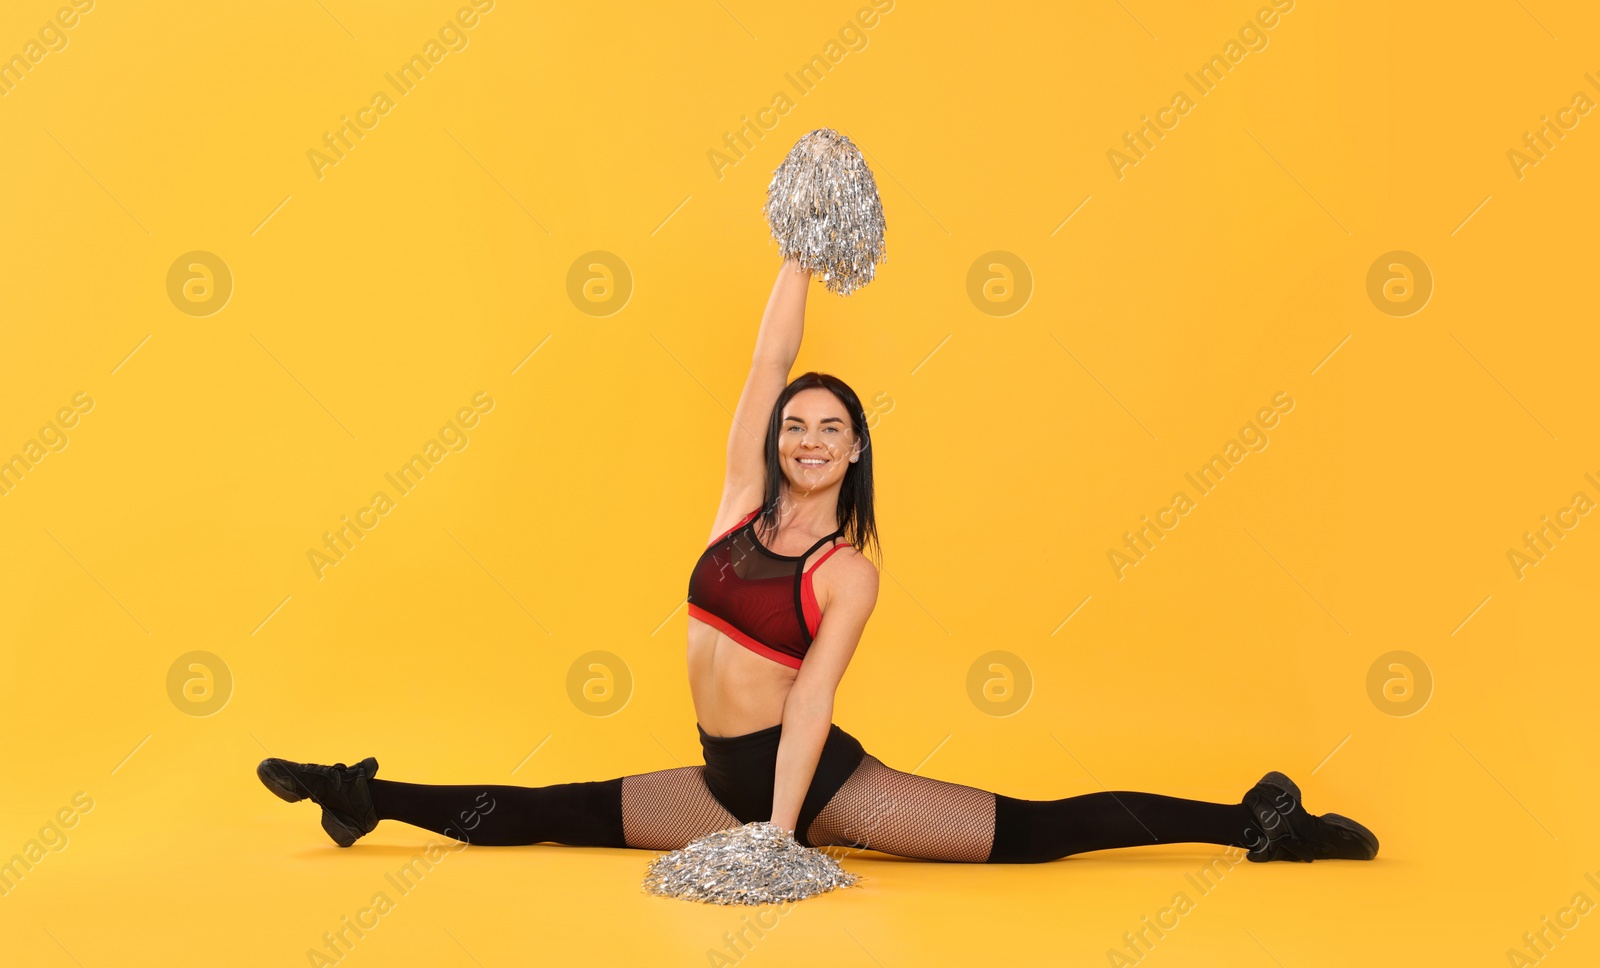 Photo of Beautiful cheerleader in costume holding pom poms on yellow background